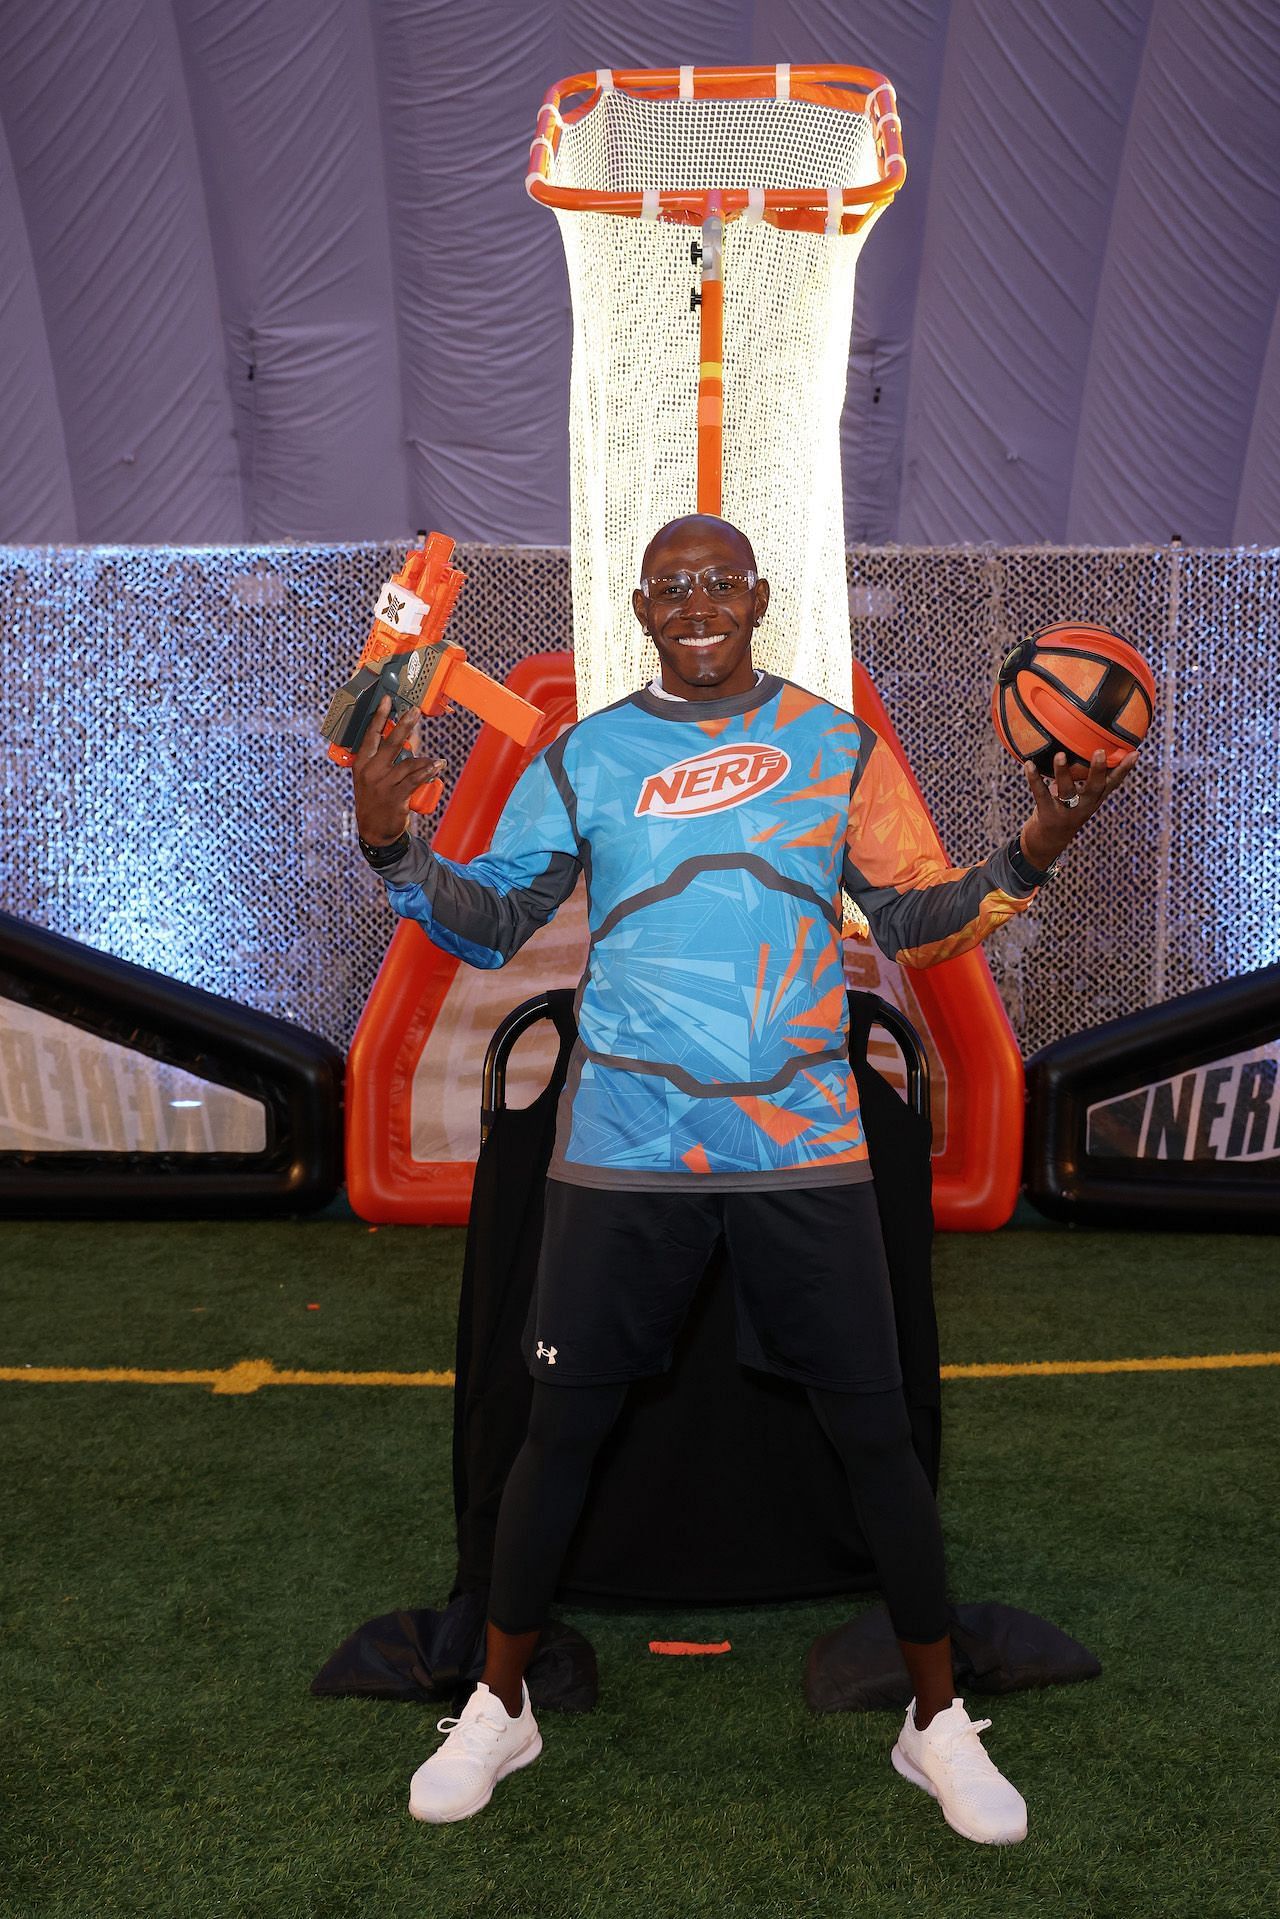 Donald Driver playing in the NERFBALL tournament. Credit: Hasbro